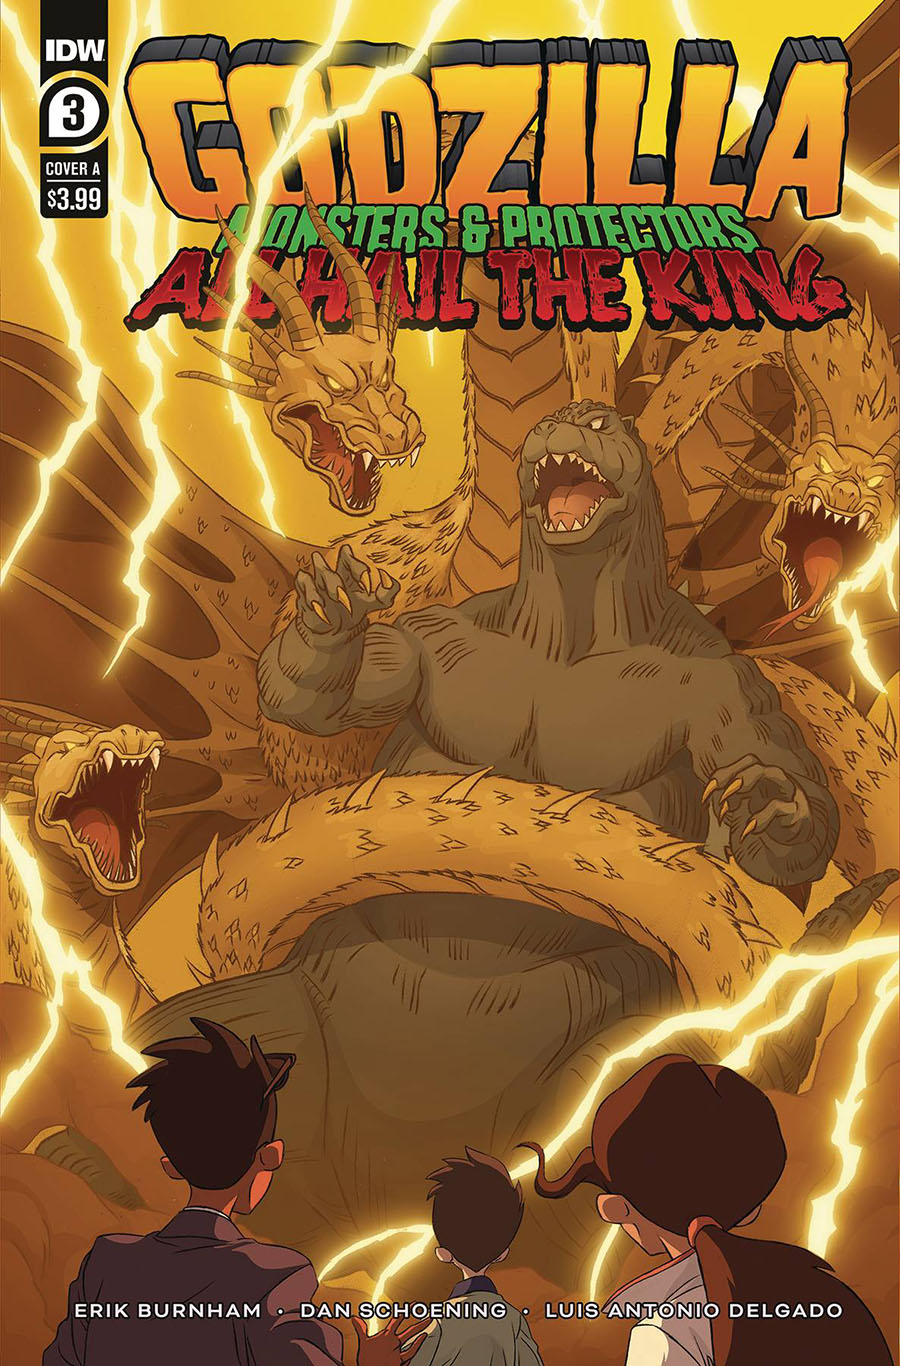 Godzilla Monsters & Protectors All Hail The King #3 Cover A Regular Dan Schoening Cover